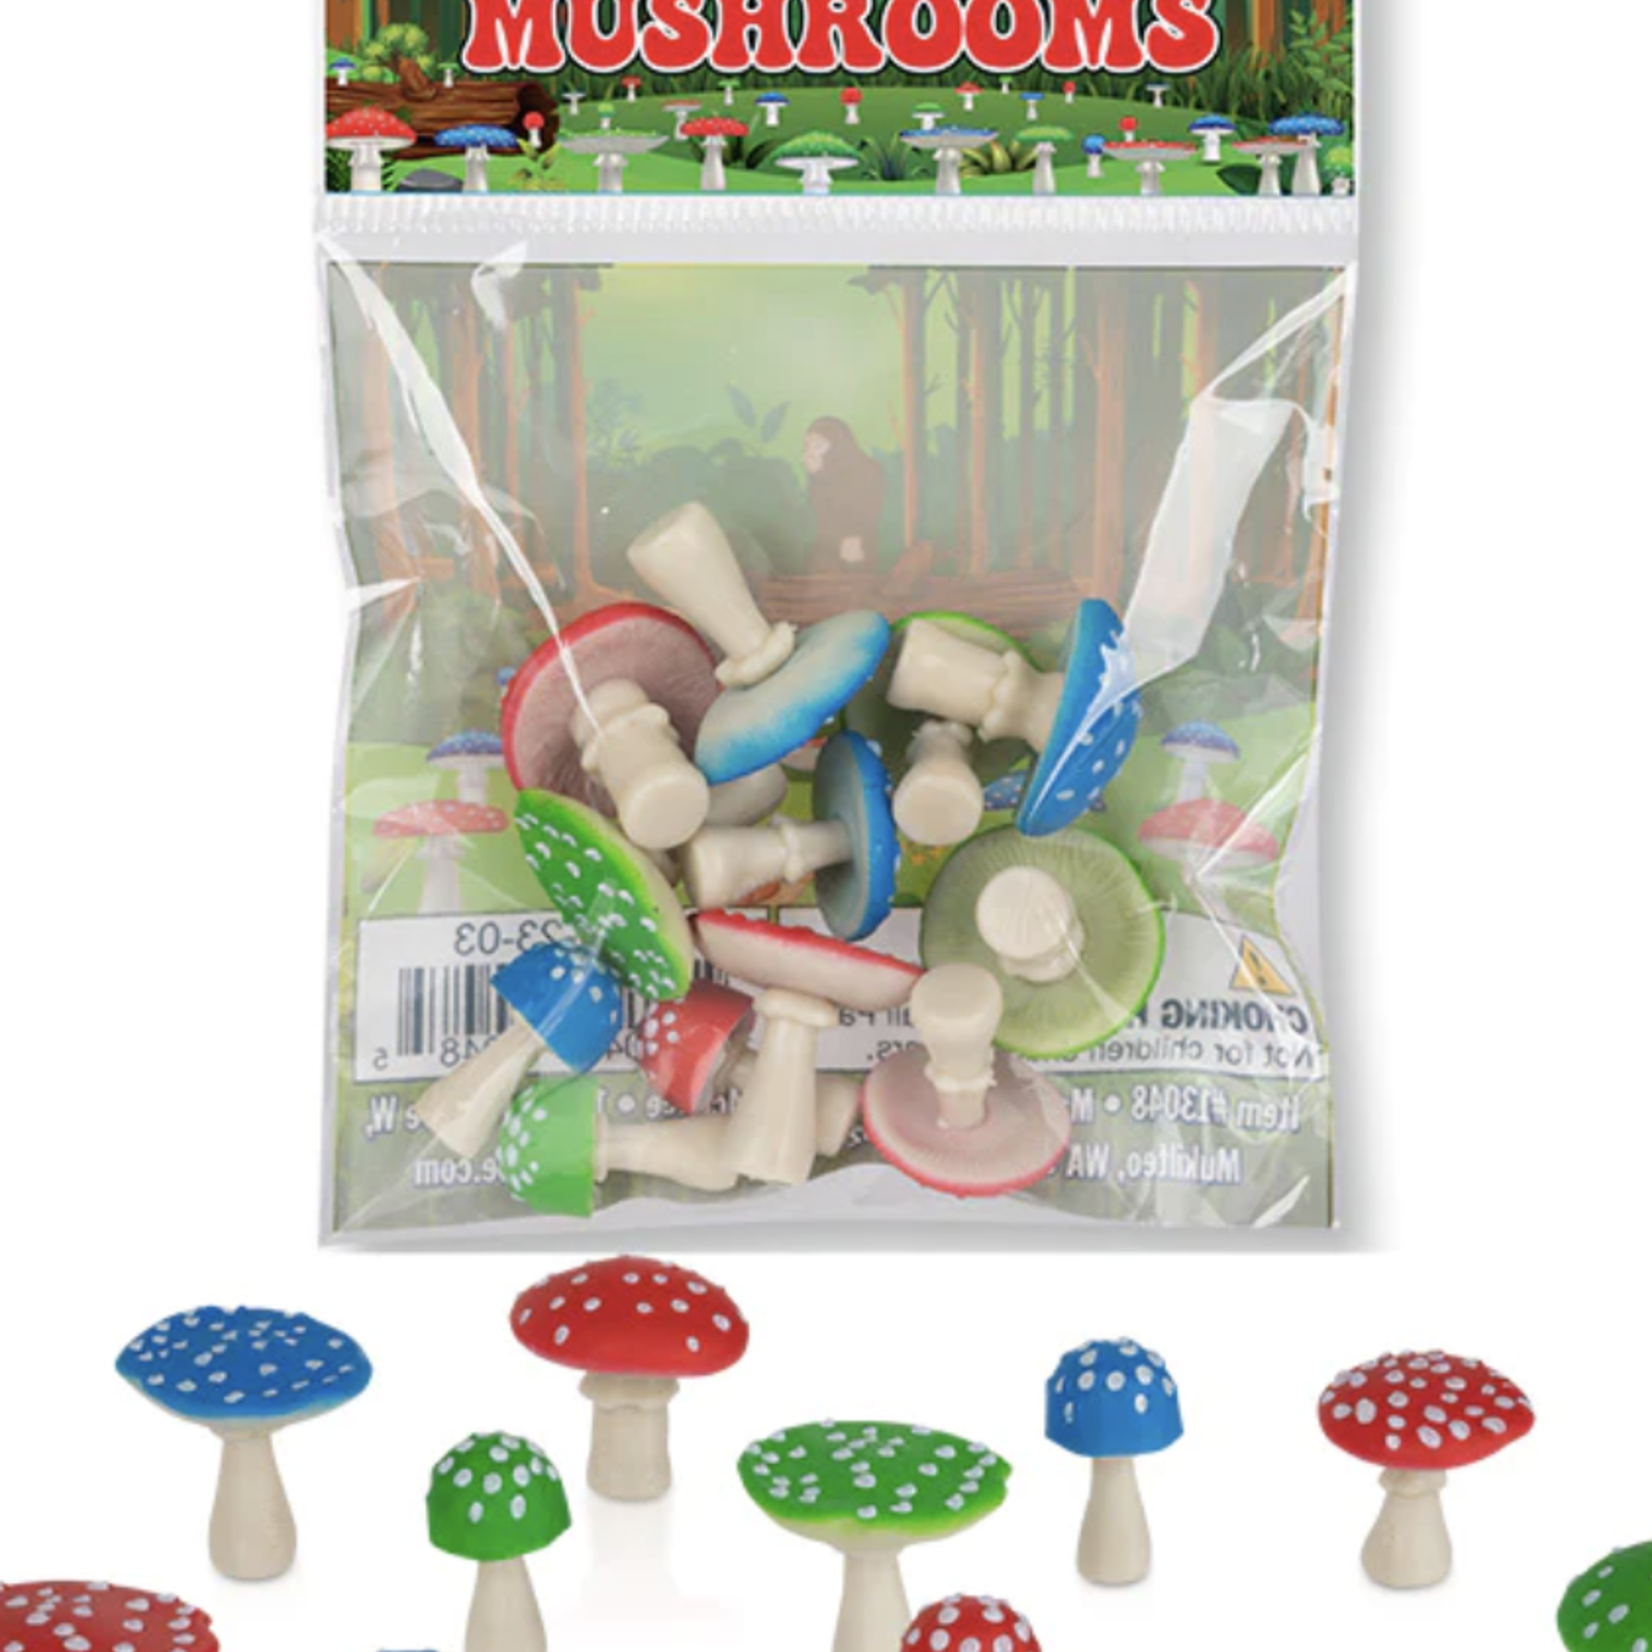 Accoutrements/Archie McPhee Itty Bitty Mushrooms